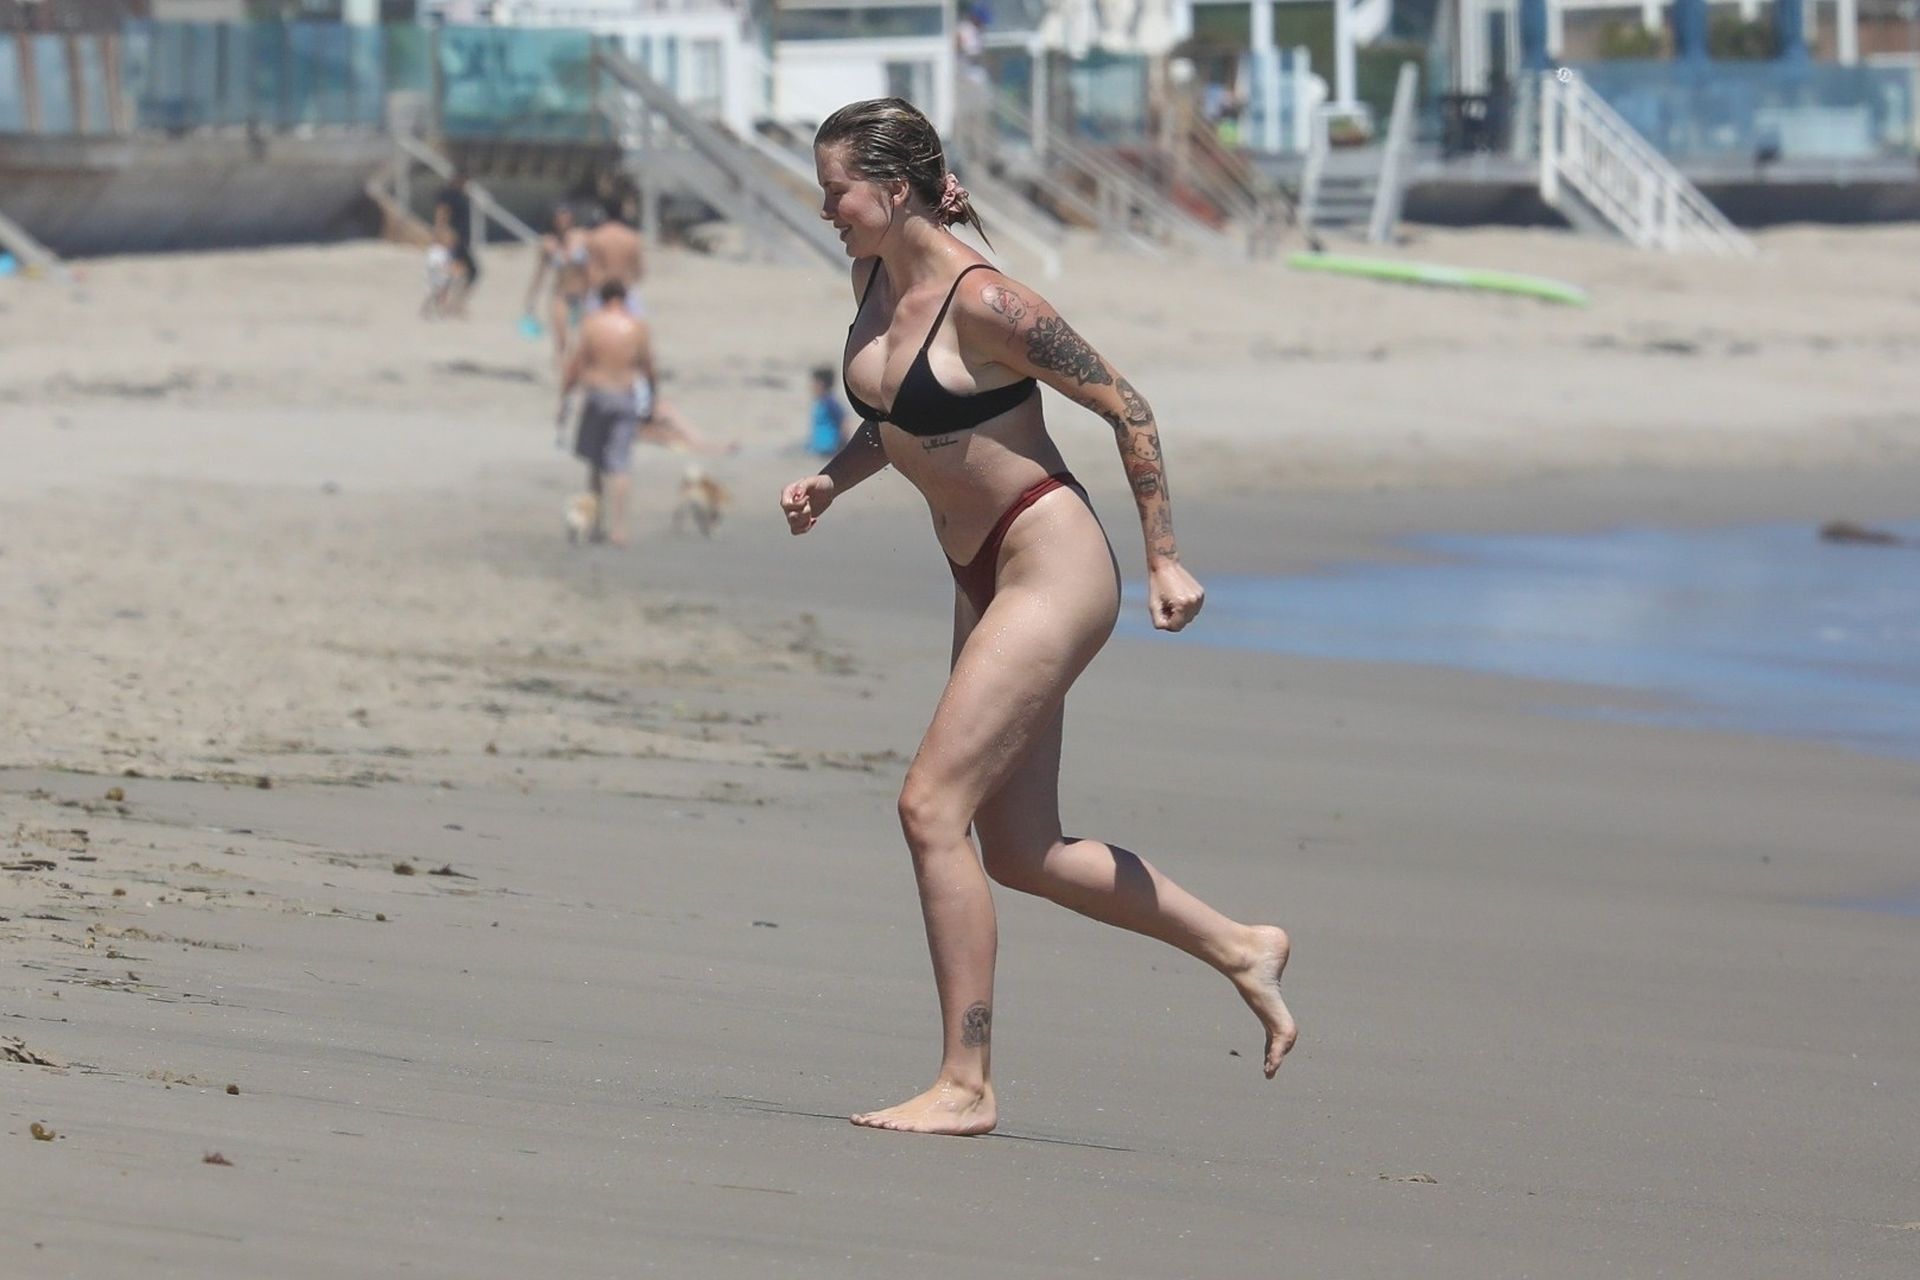 Ireland Baldwin and Friends Have a Chicken Fight in the Water (172 Photos)